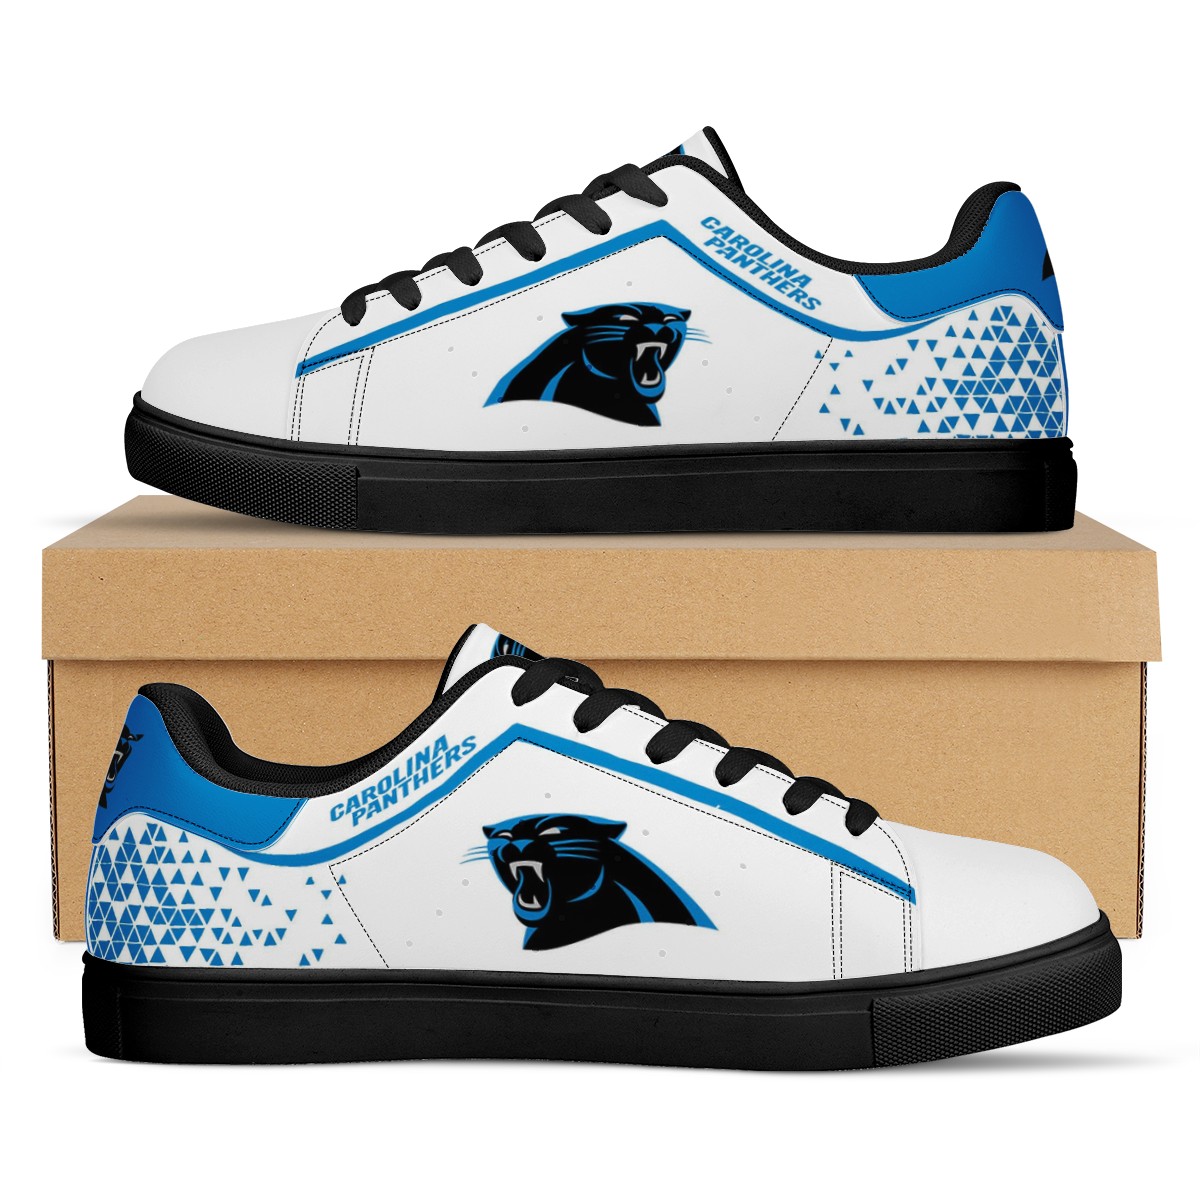 Women's Carolina Panthers Low Top Leather Sneakers 001